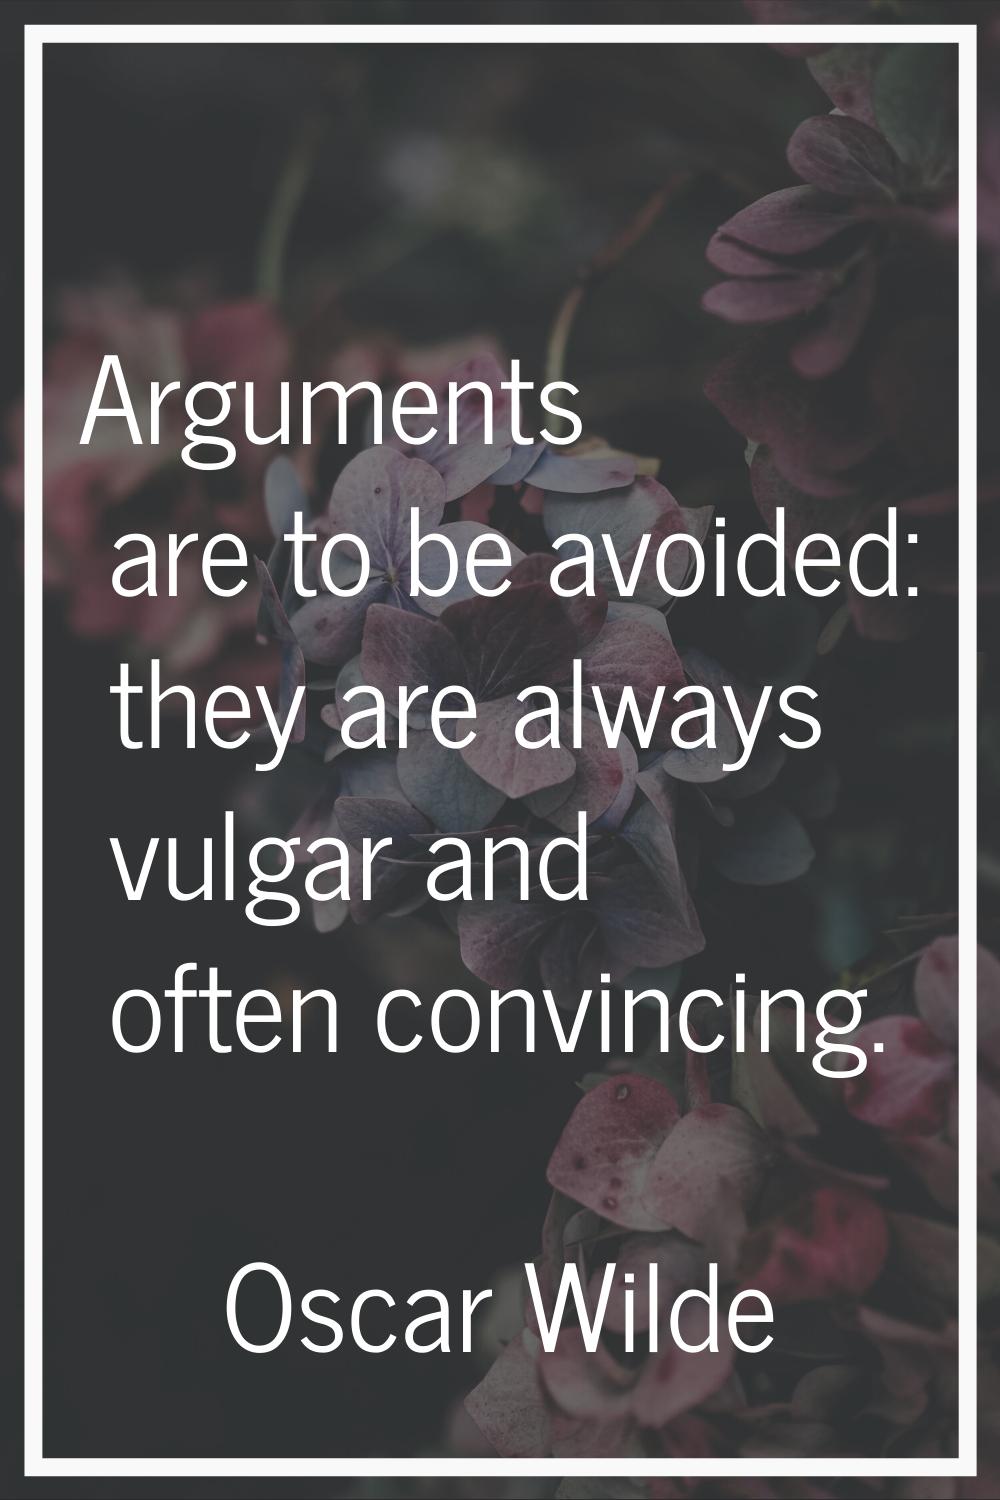 Arguments are to be avoided: they are always vulgar and often convincing.